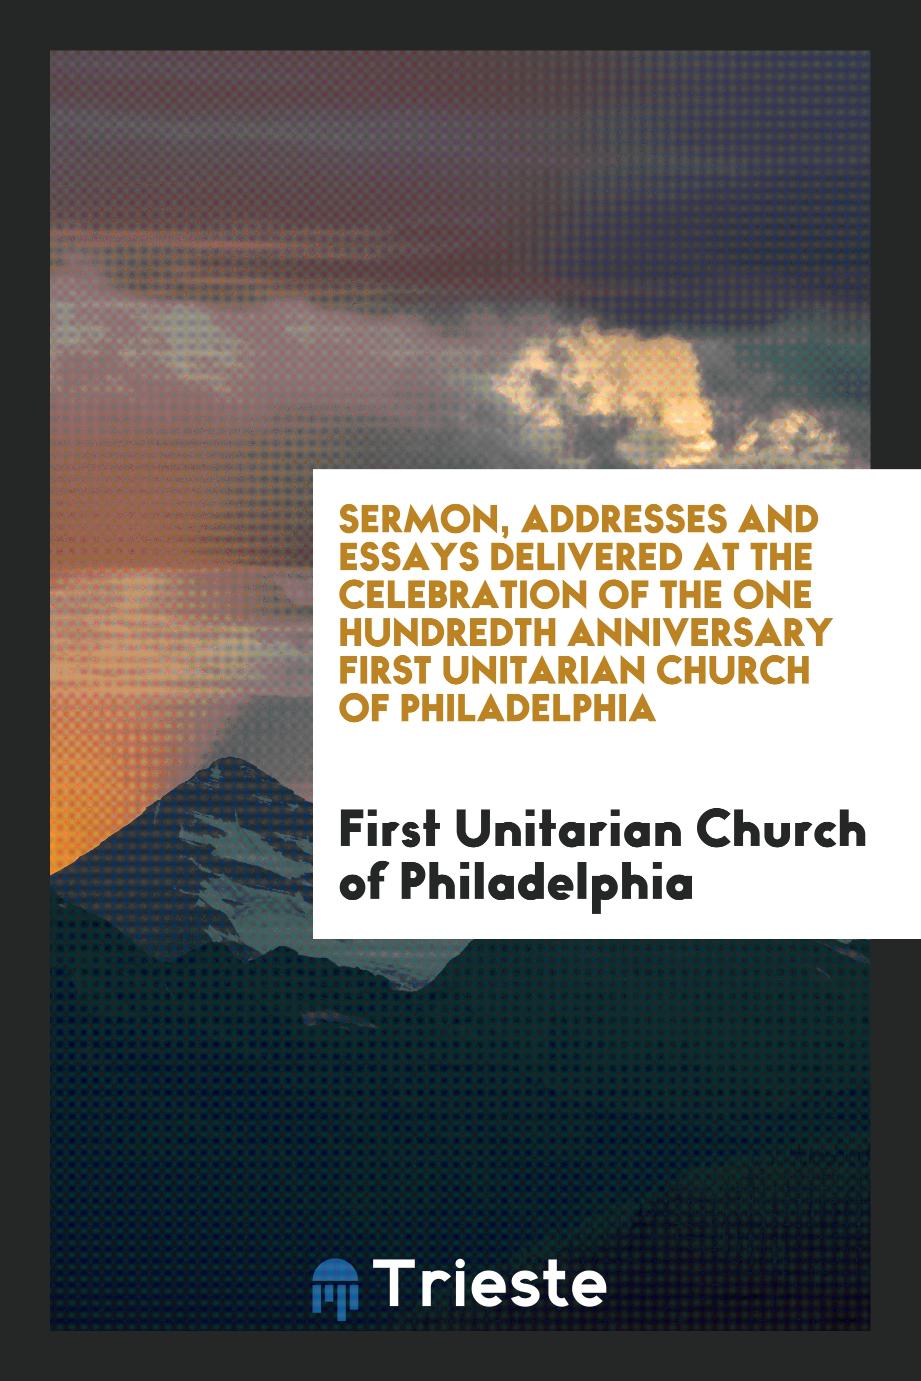 Sermon, Addresses and Essays Delivered at the Celebration of the One Hundredth Anniversary First Unitarian Church of Philadelphia